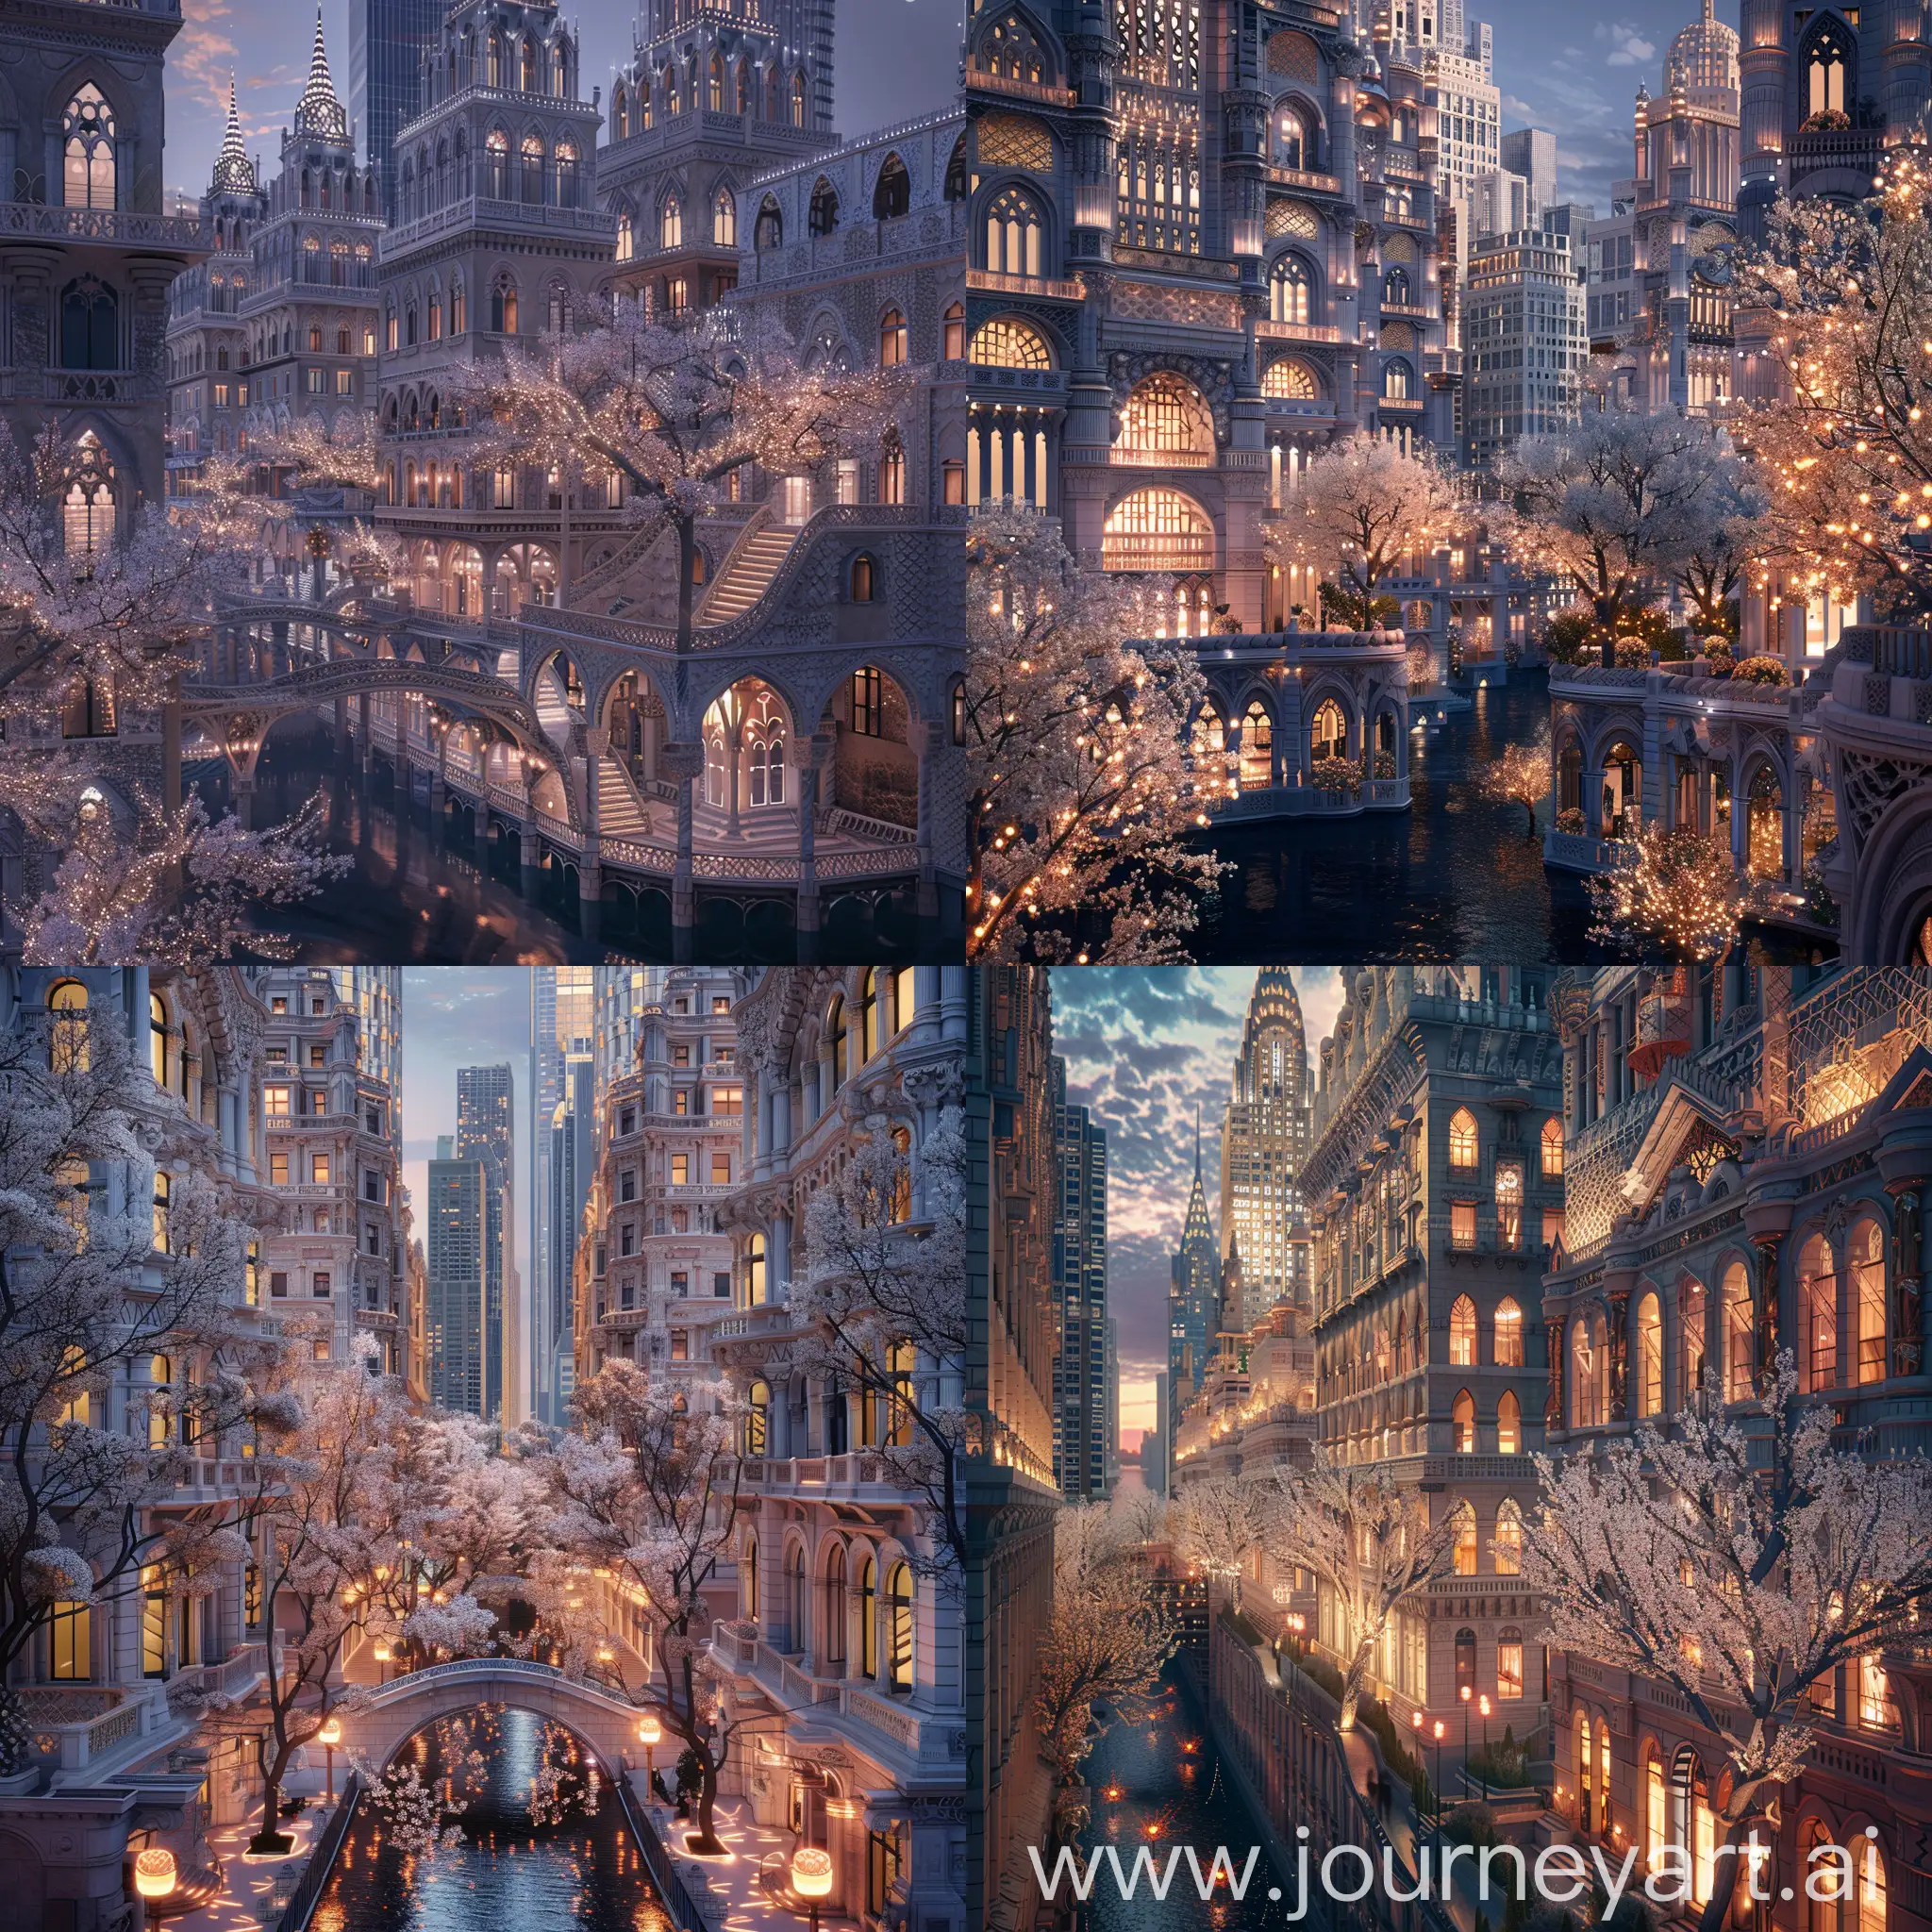 Beautiful futuristic New York City in an alternate timeline where all buildings retain traditional elements, ornate travertine architecture with scale-like patterns on facades and illuminated blossoming trees, monumental terraced buildings, canals, photograph